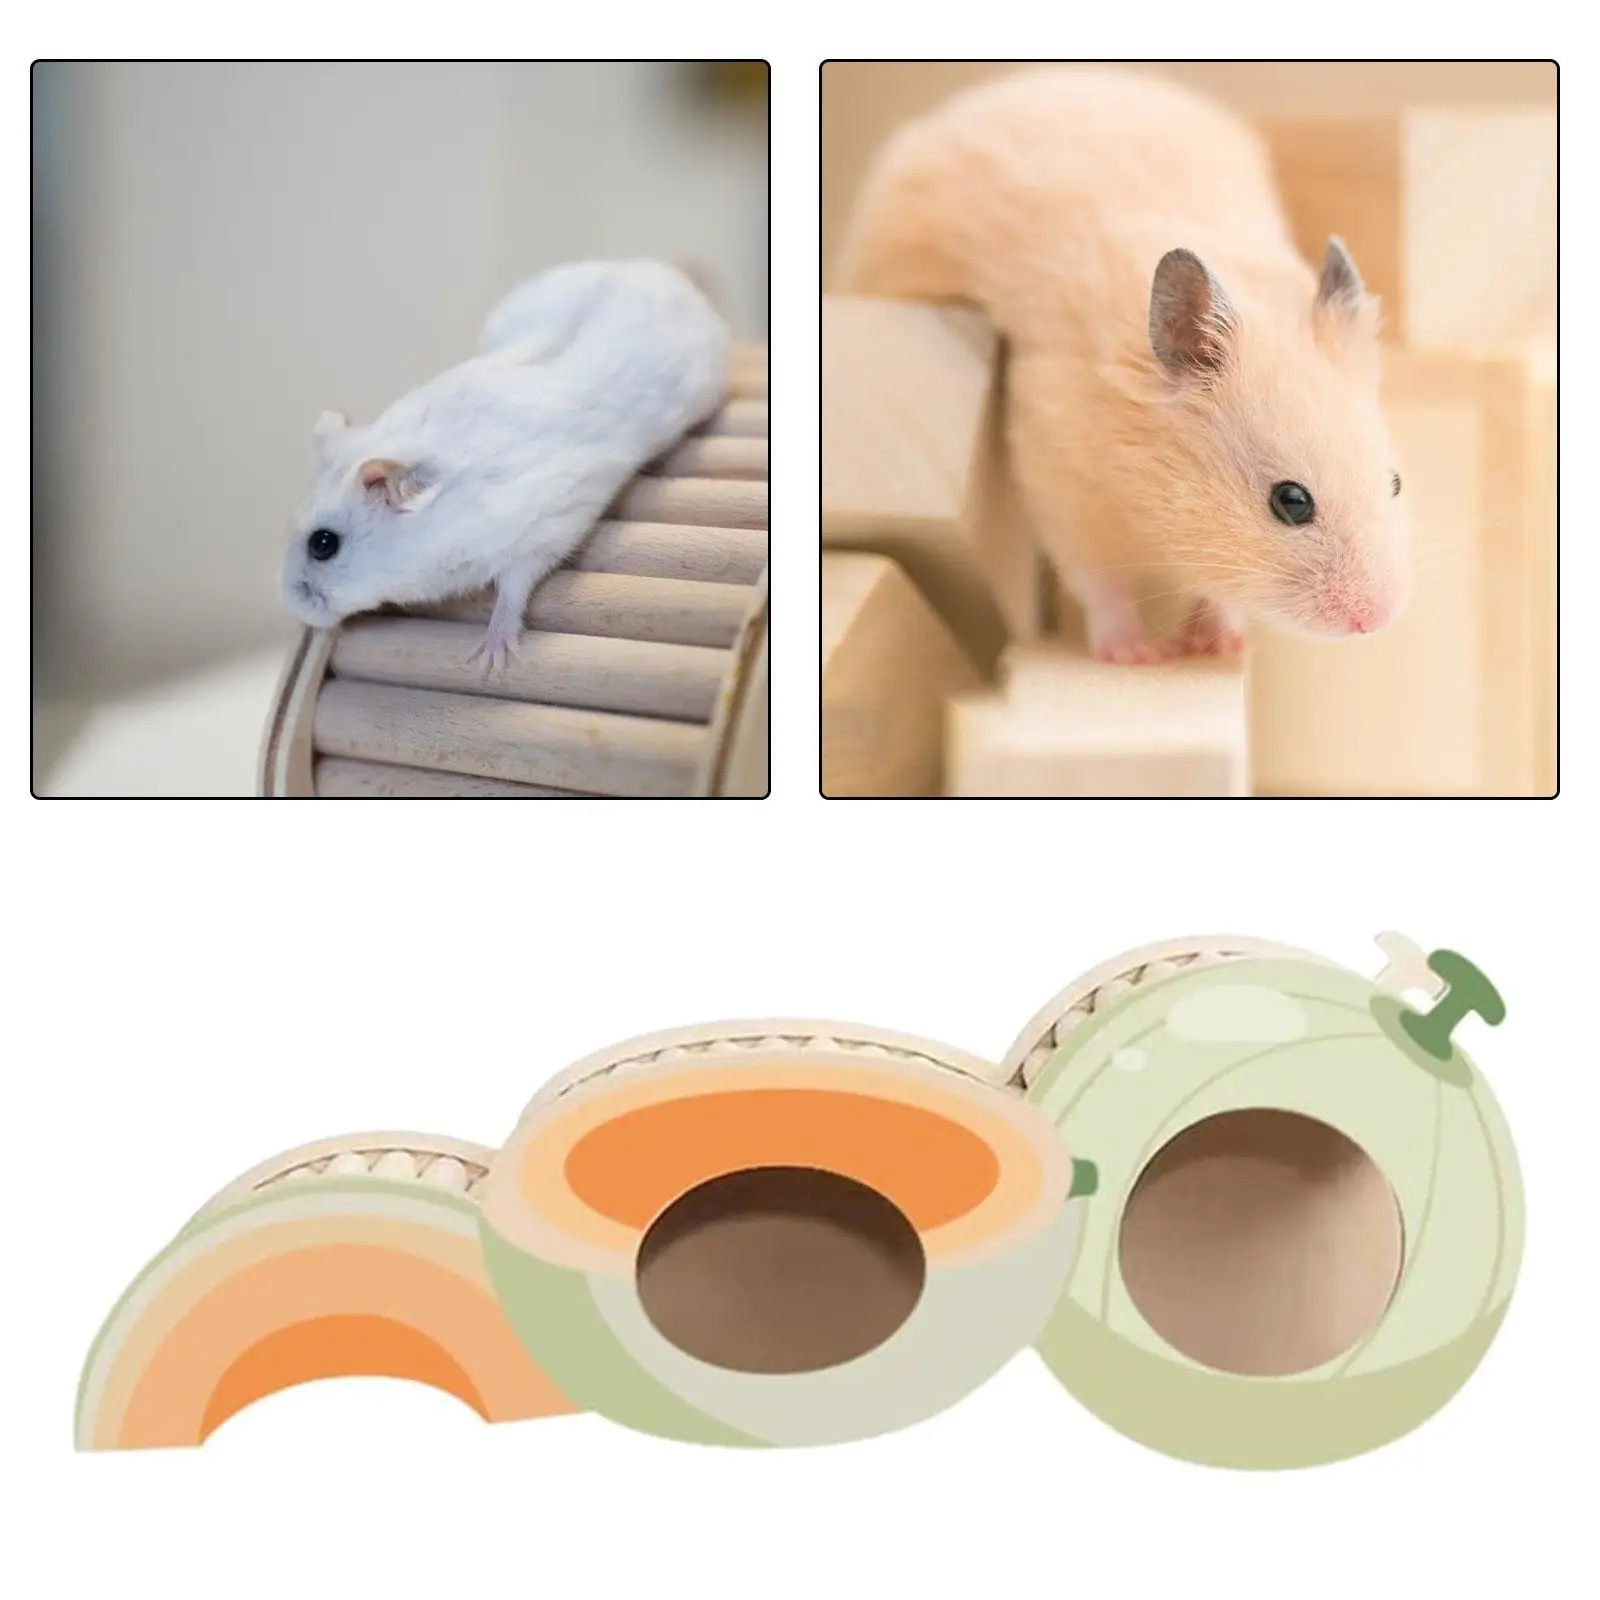 Creative Hamster Tunnels Exercise Toys Wooden Hamster Tunnels with Climbing Ladder Small Animals Sleeping House for Guinea Pig